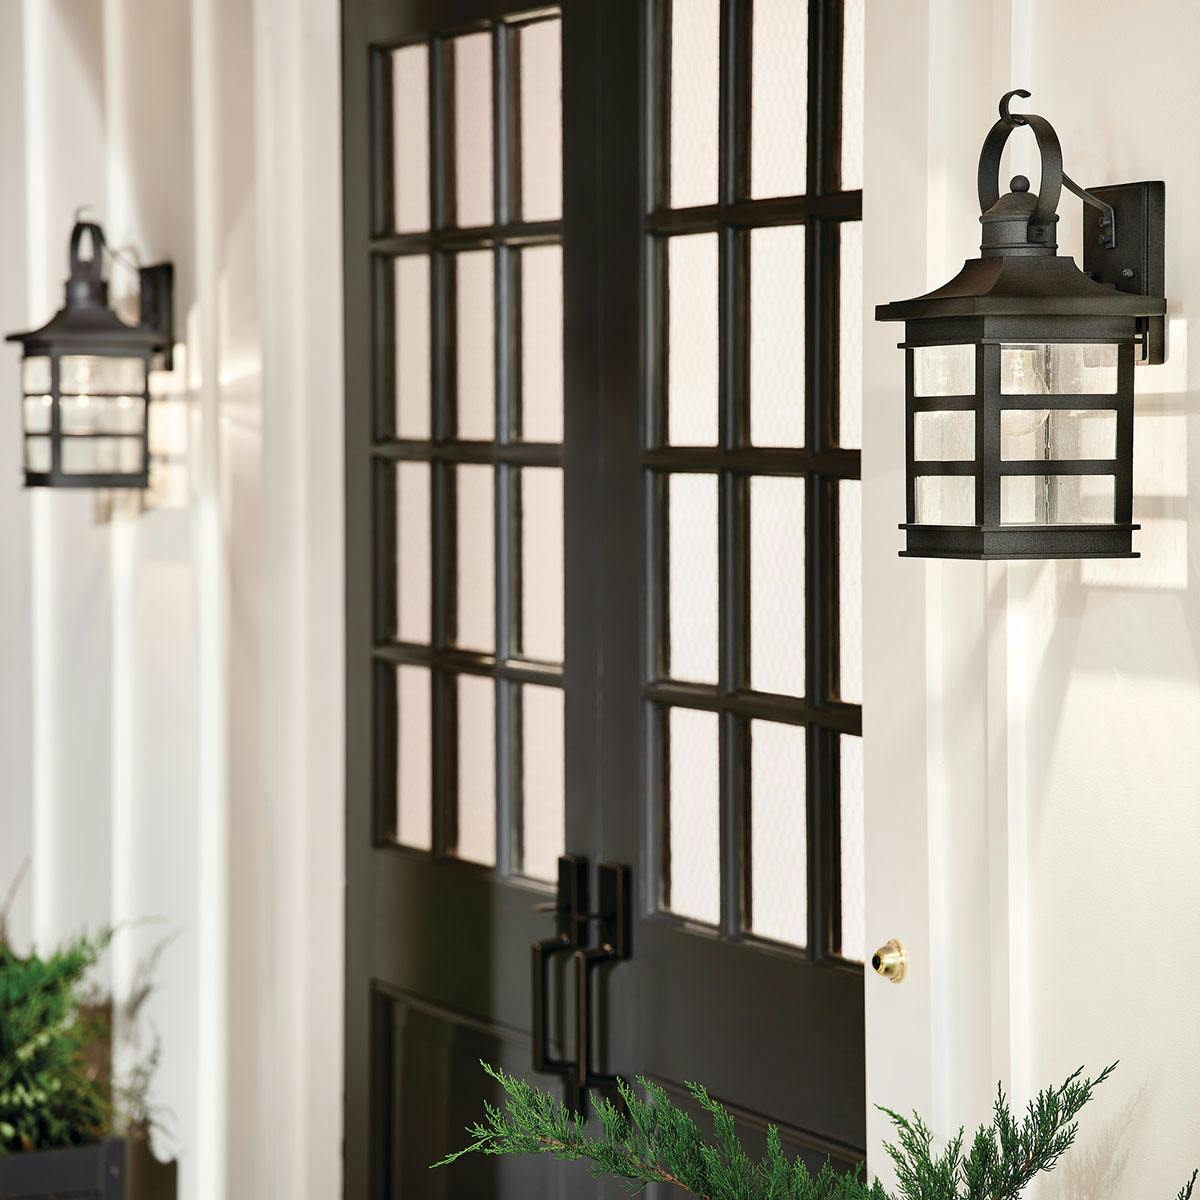 Day time outdoor entryway image featuring Grand Ridge outdoor wall light 39536